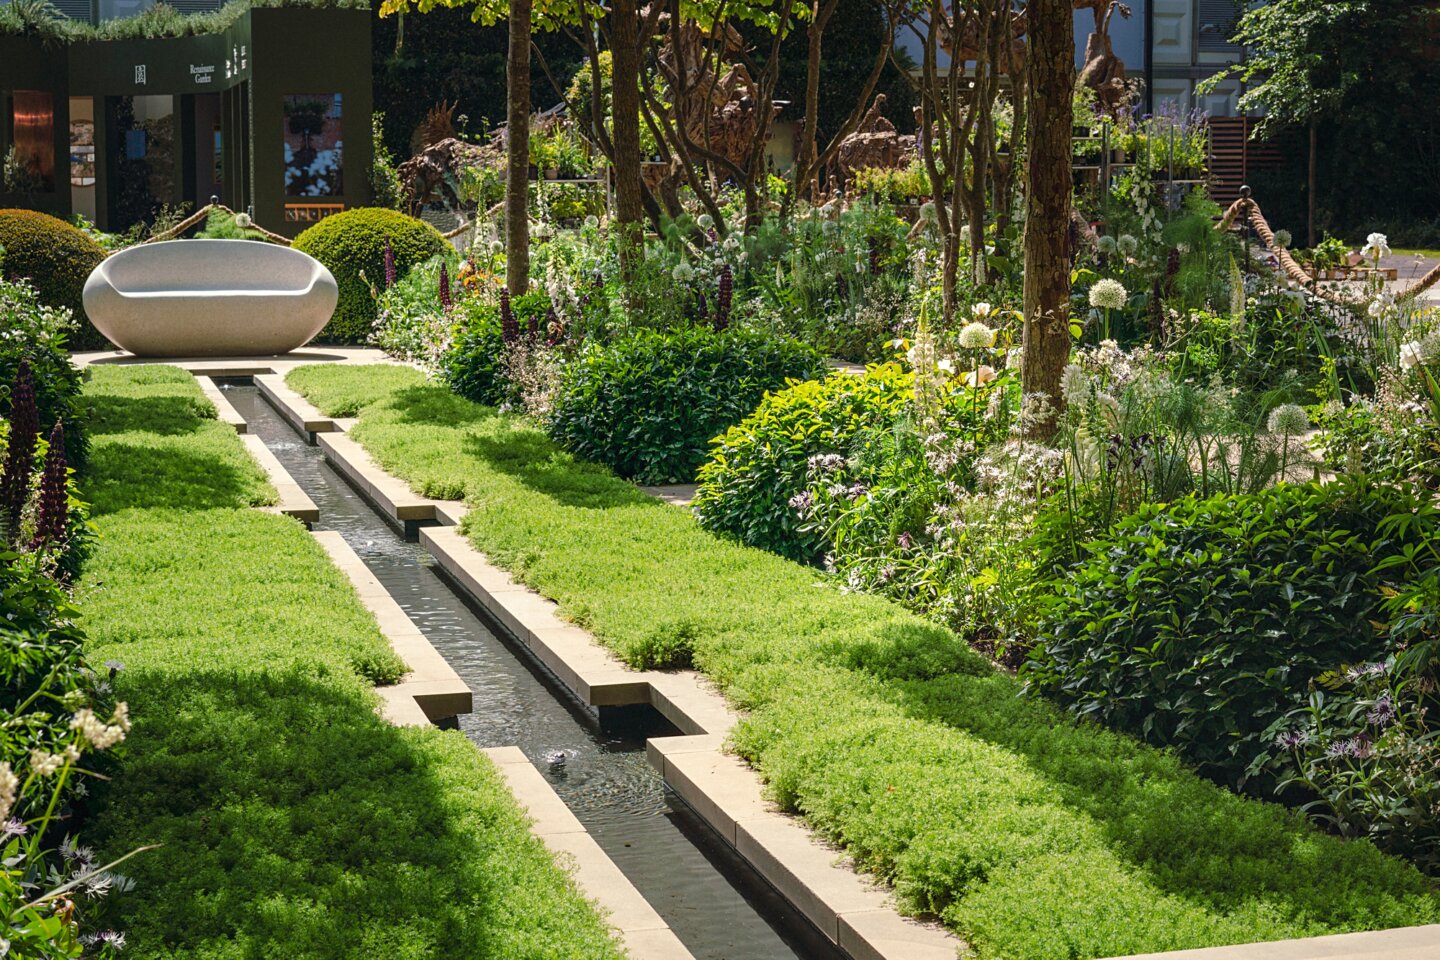 The Perennial Garden with rill and chamomile lawn lined with white and green planting